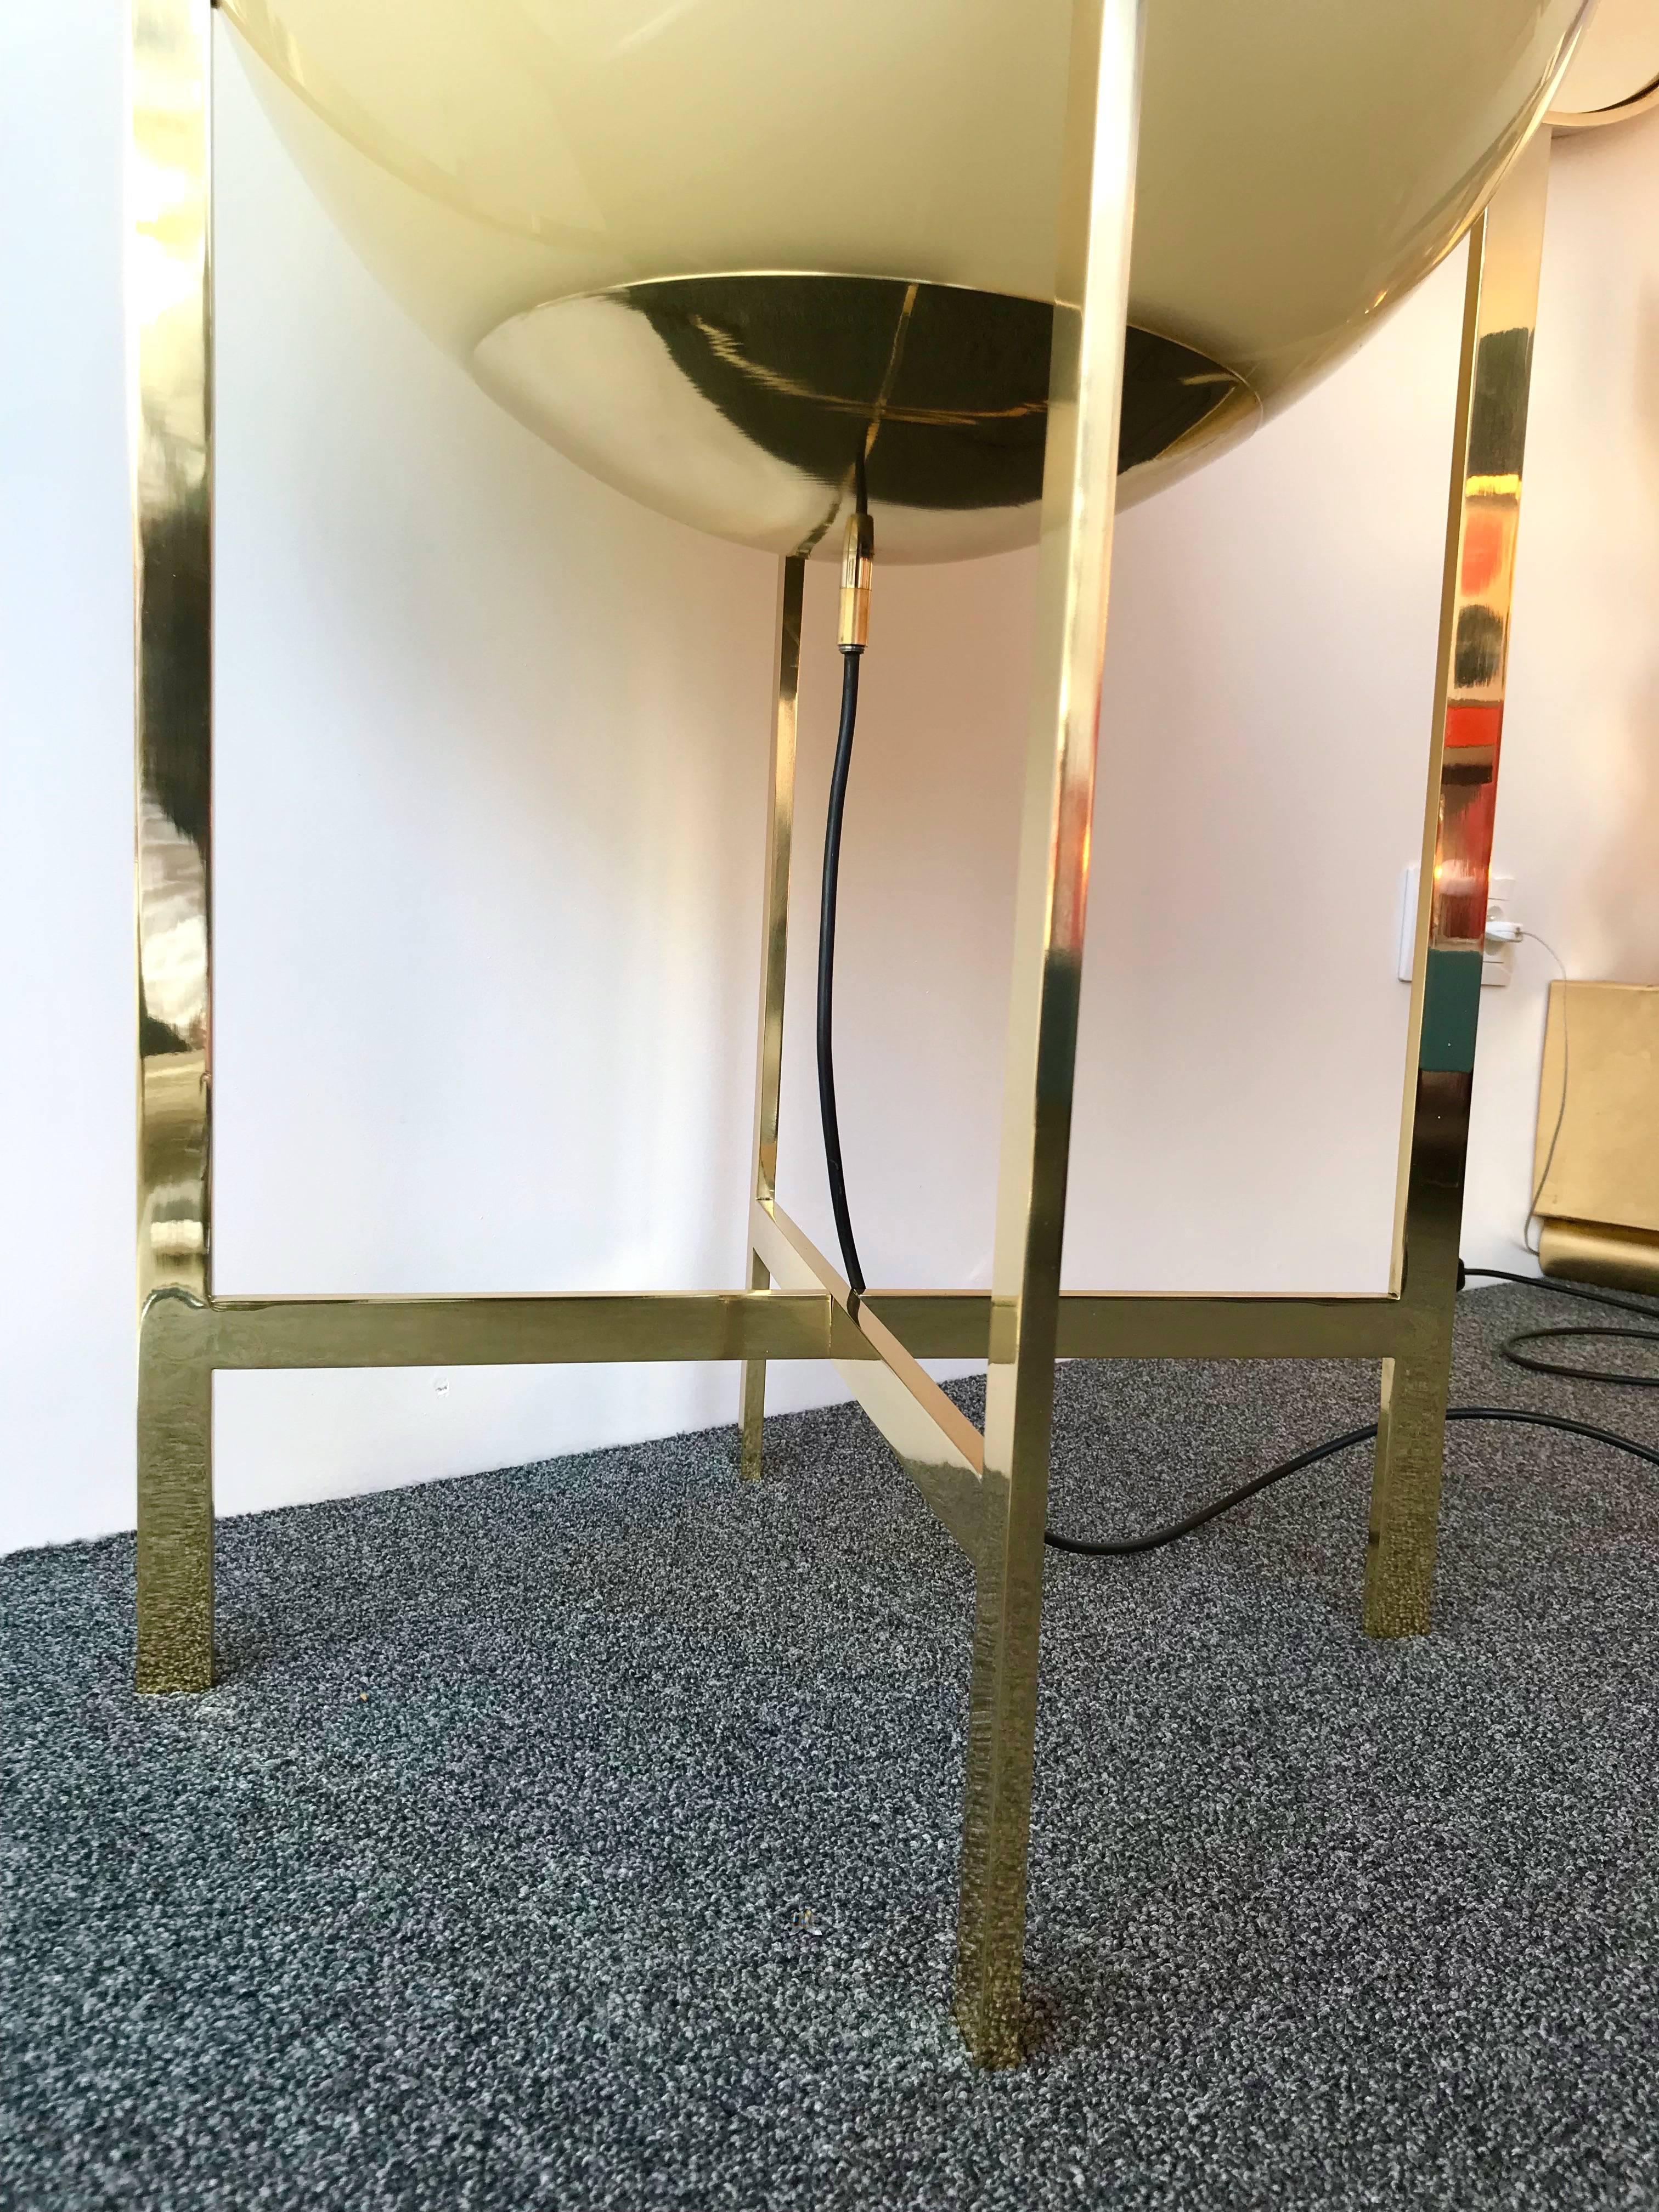 Late 20th Century Brass and Glass Floor Lamp by La Murrina Murano, Italy, 1990s For Sale